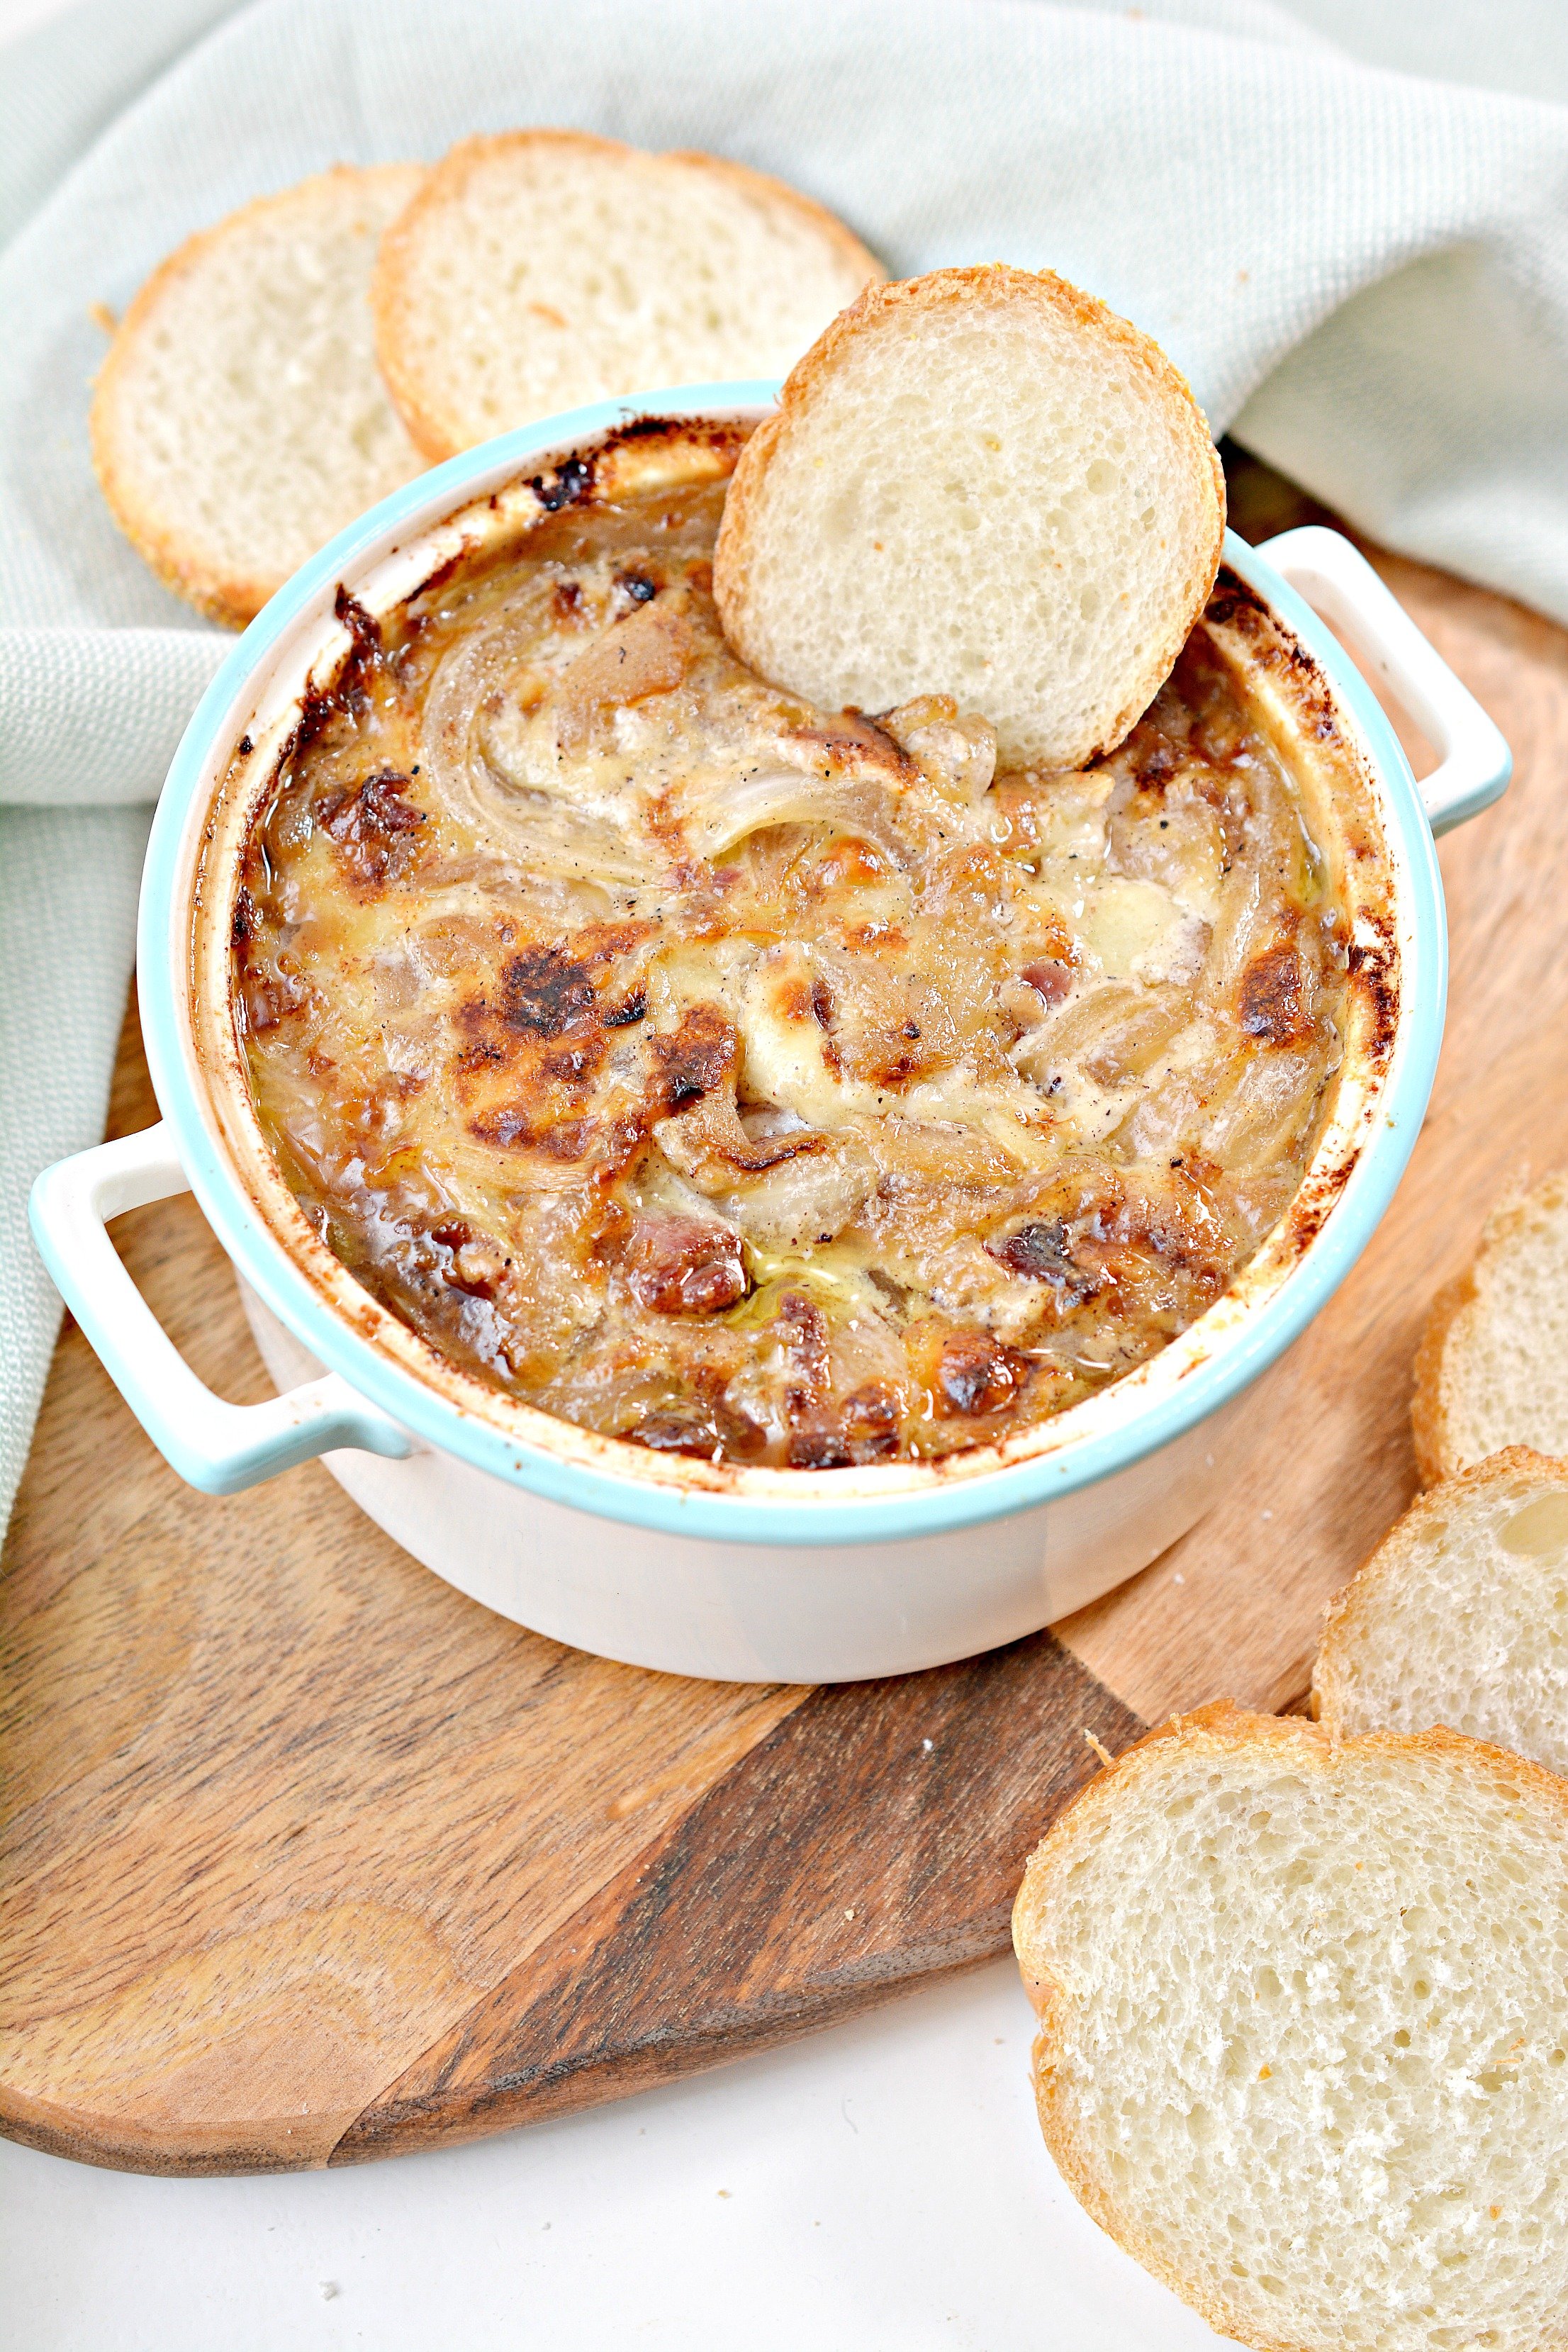 Hot Caramelized Onion and Bacon Dip is the ultimate super easy appetizer to make for any casual get together any time of the year!